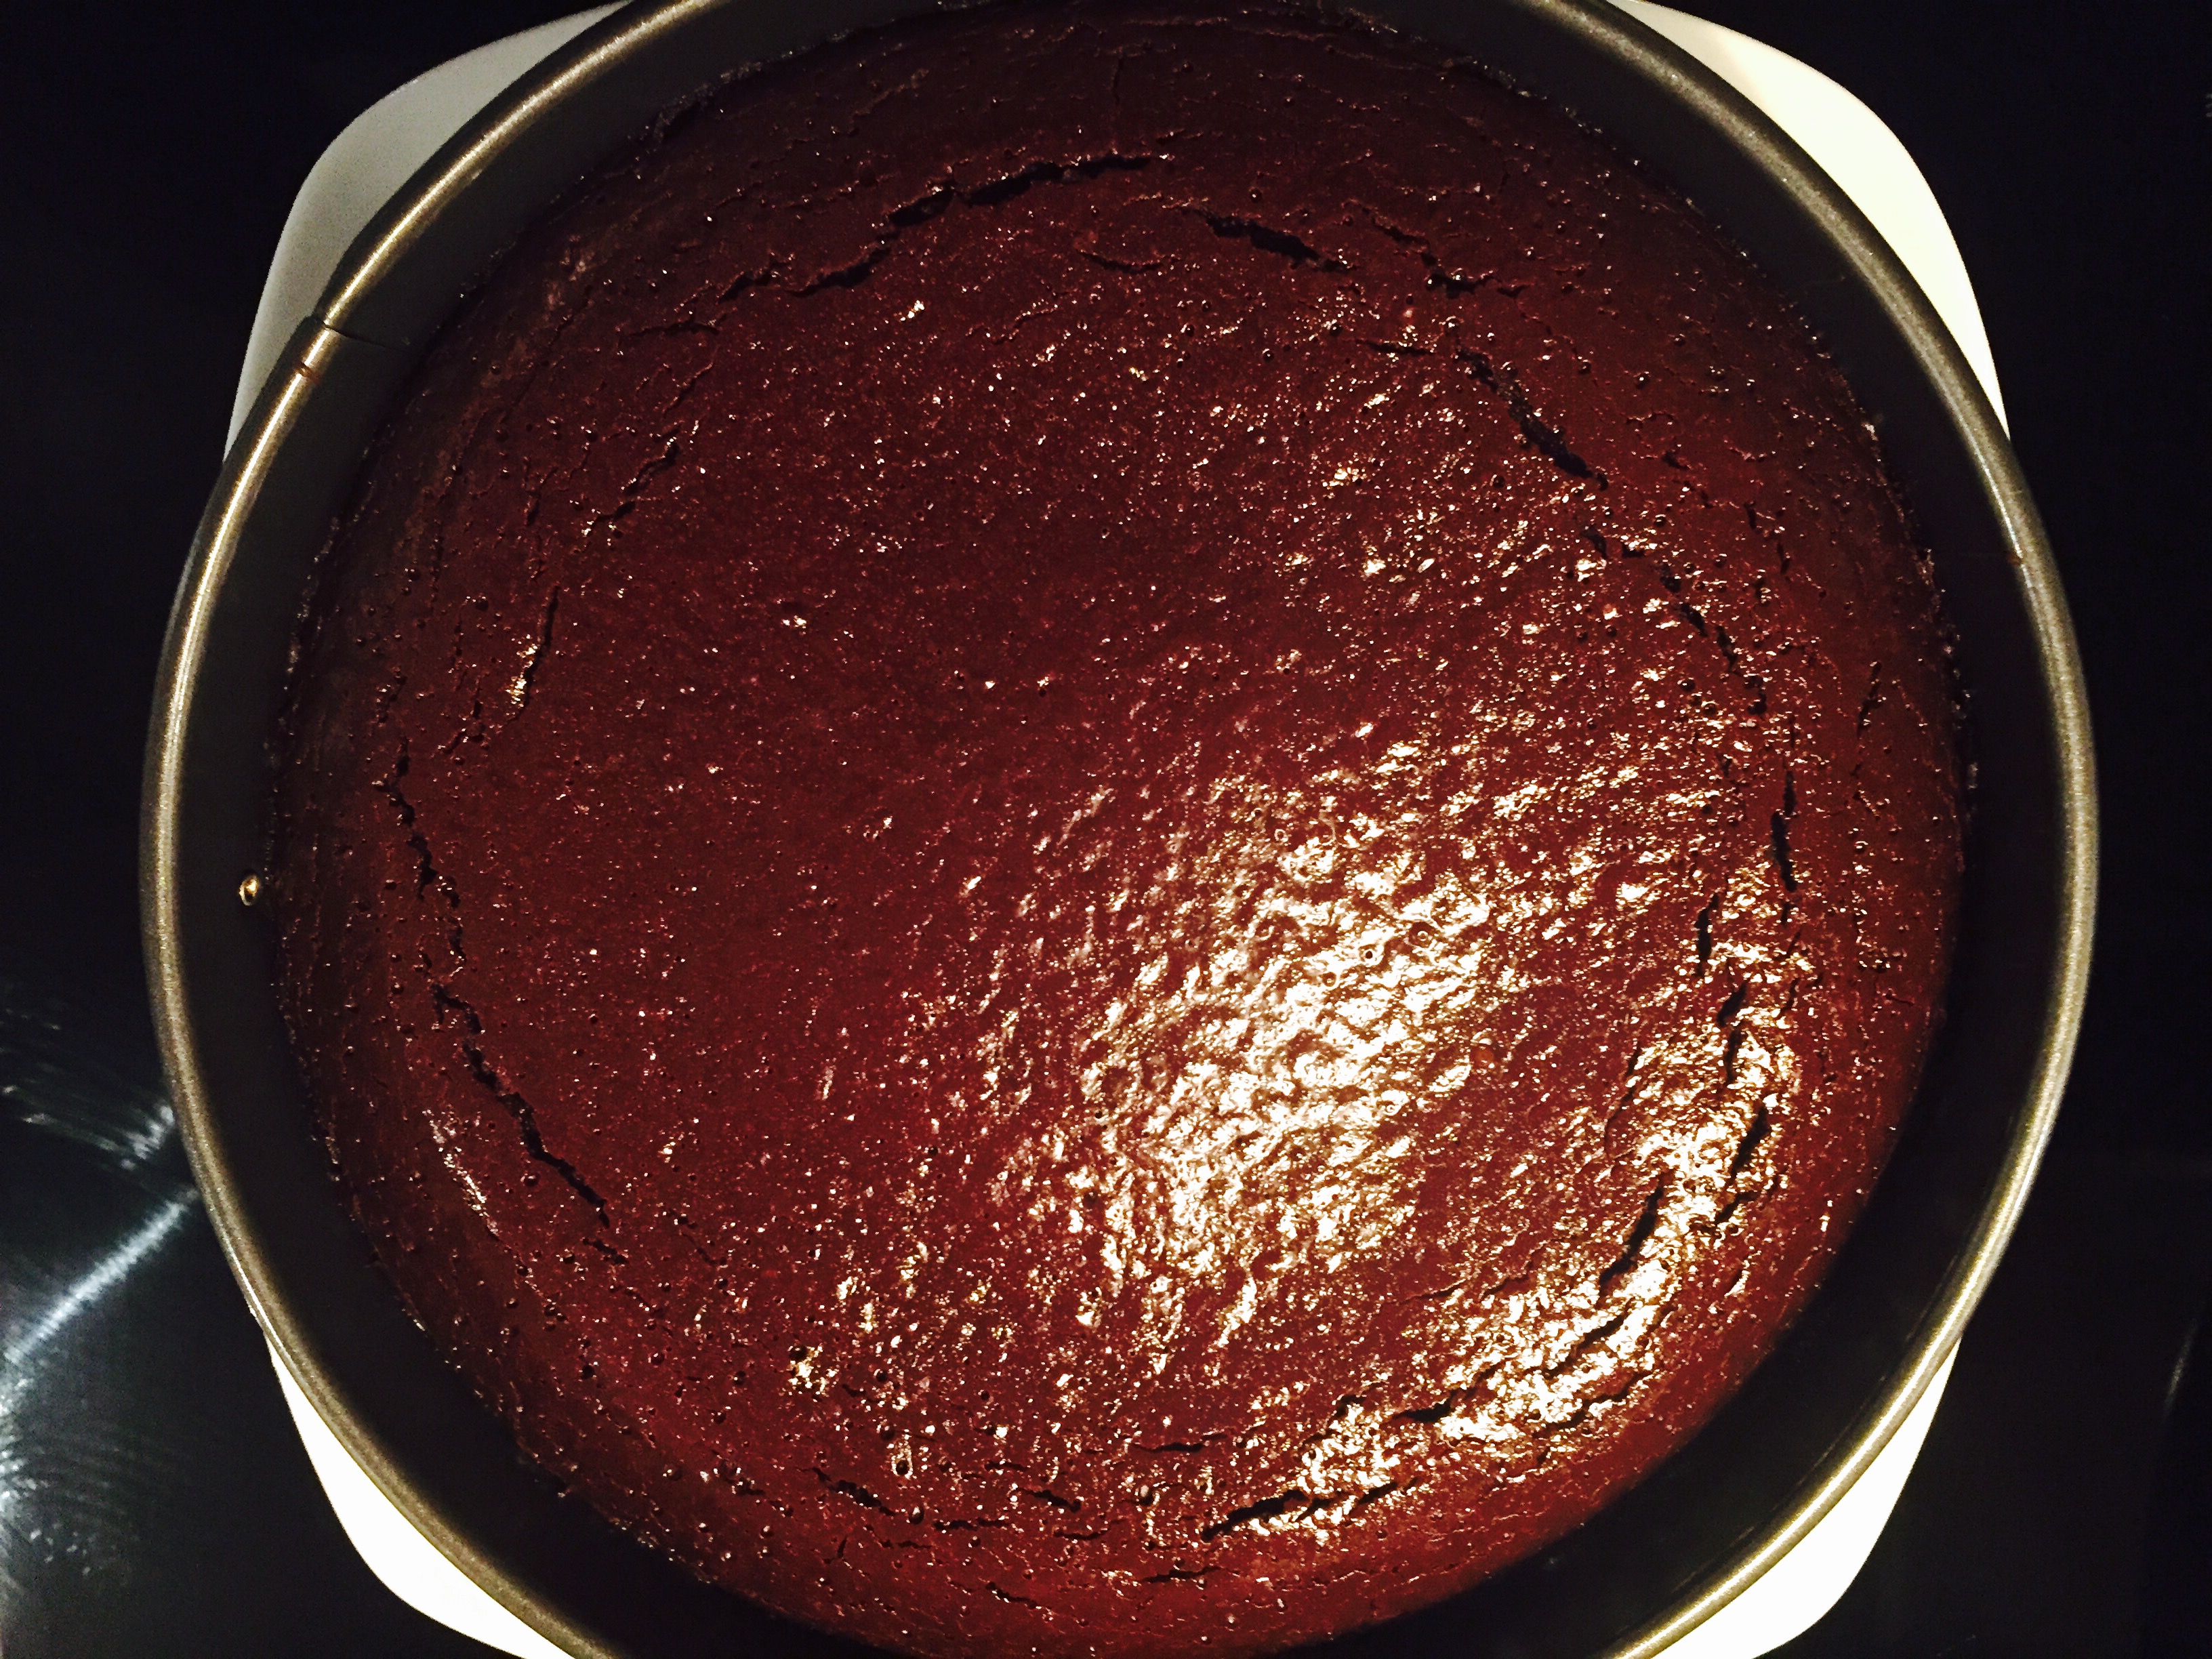 Delicious chocolate torte right out of the oven and ready to chill